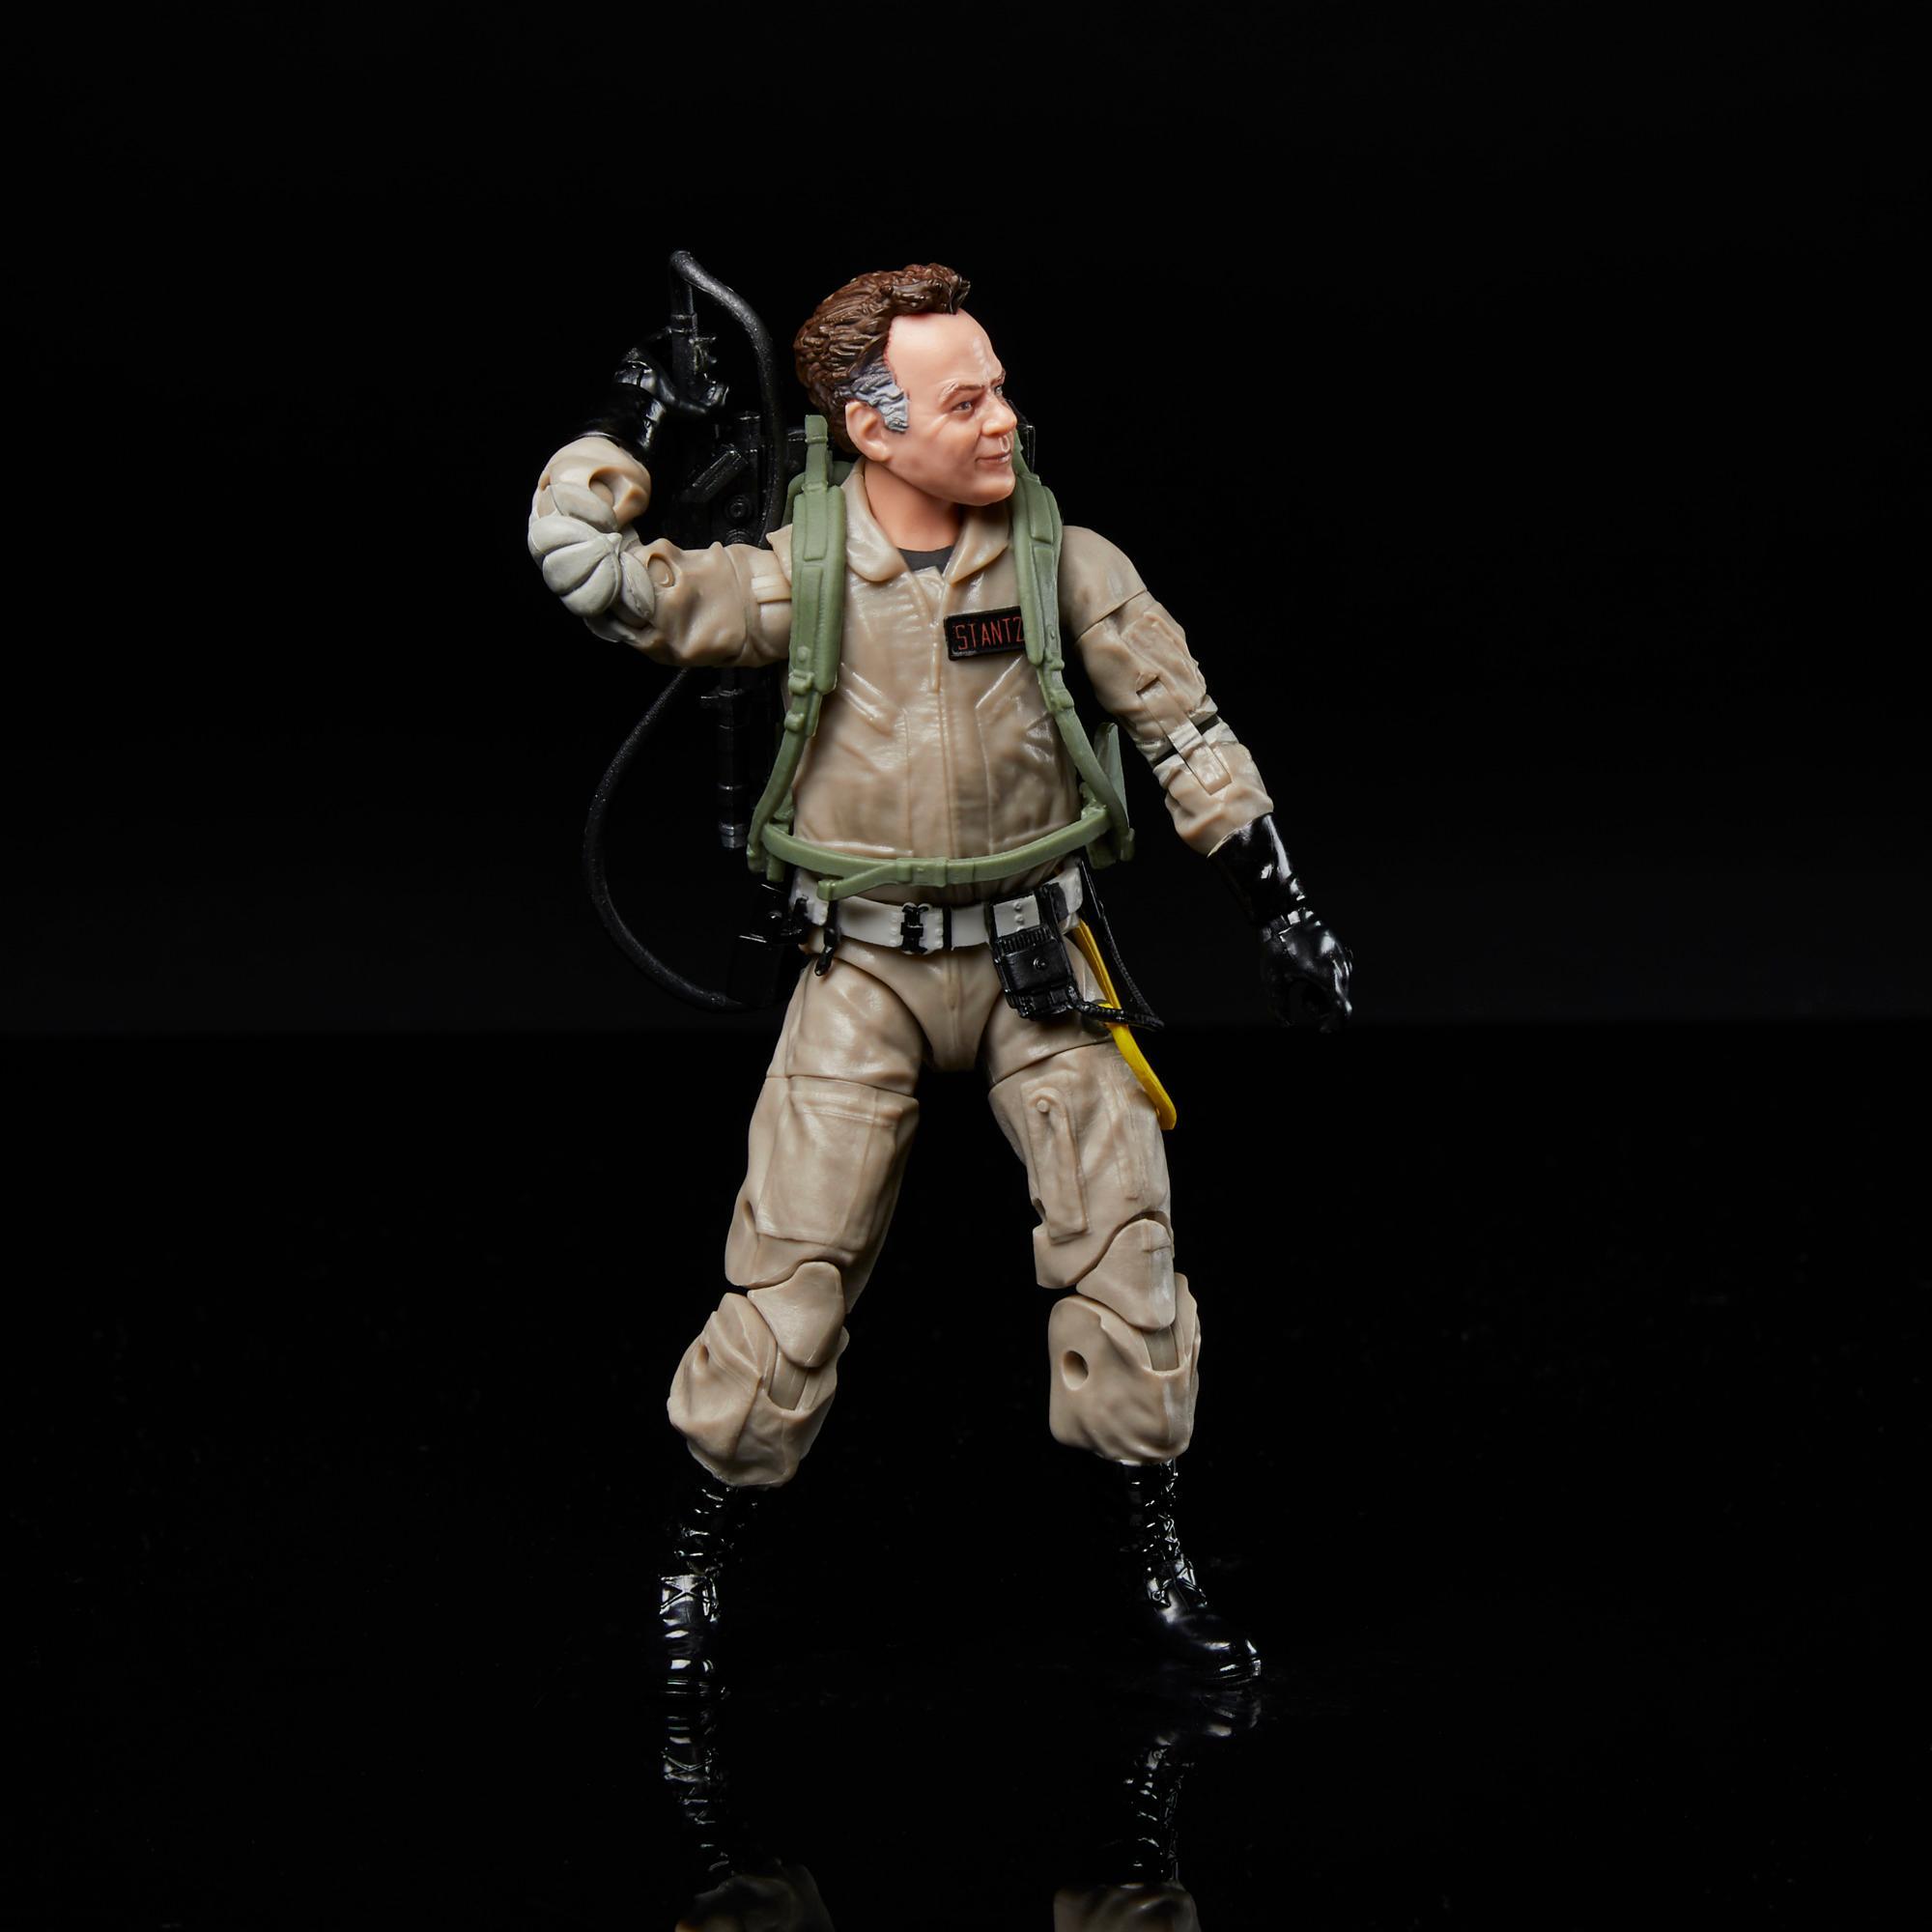 Ghostbusters Plasma Series Ray Stantz Toy 6-Inch-Scale Collectible Ghostbusters: Afterlife Figure, Ages 4 and Up product thumbnail 1